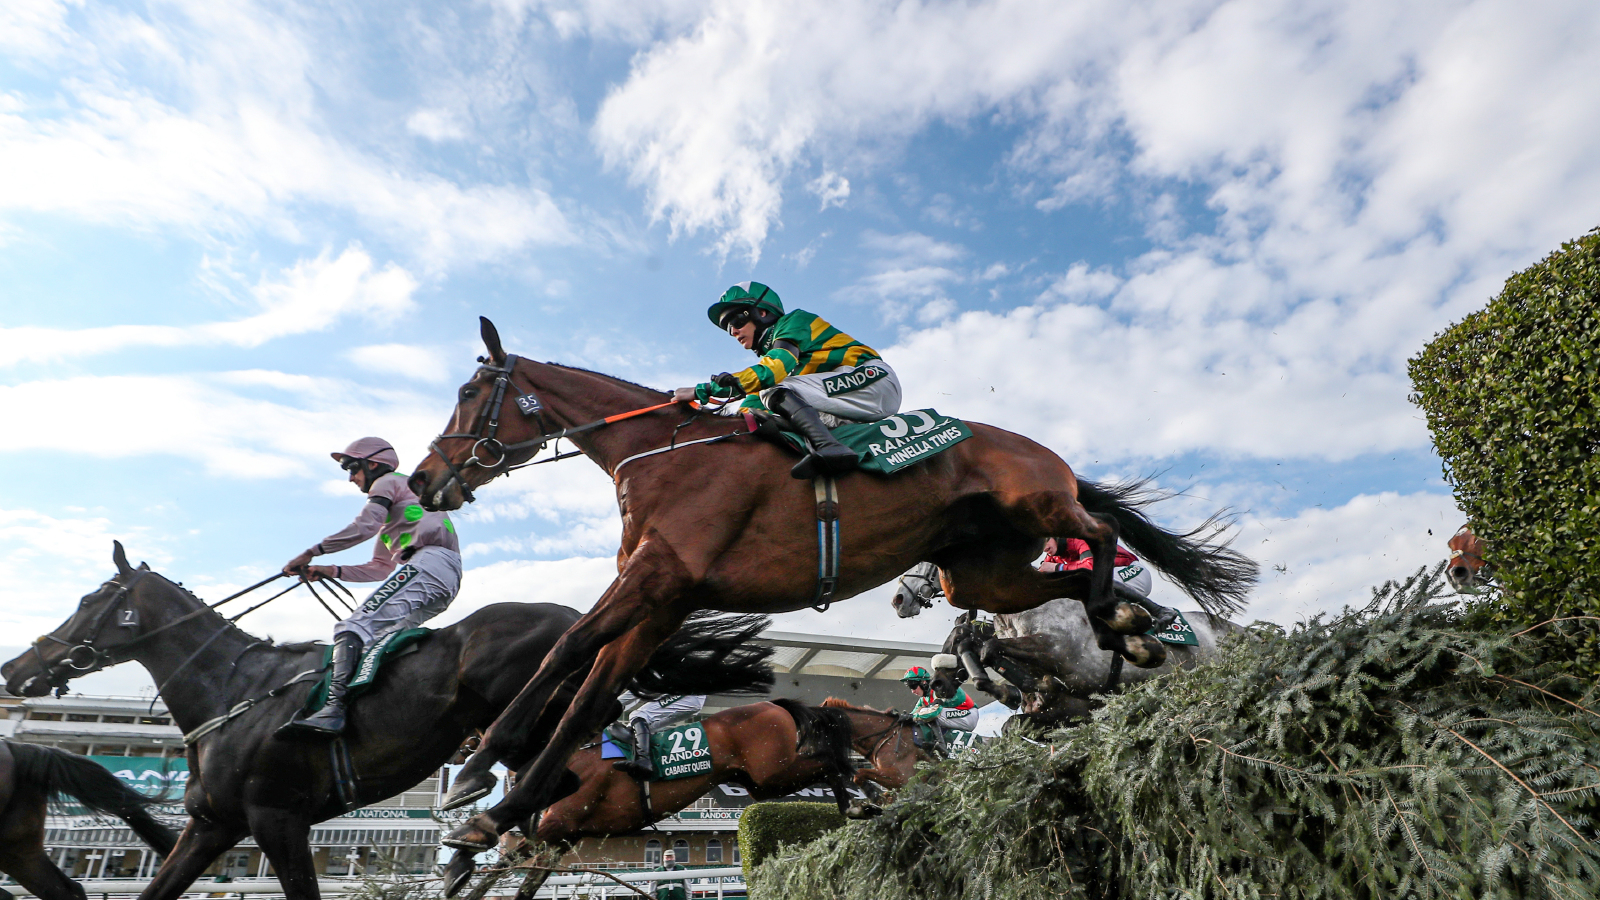 Article: Get your Watches Ready for the Grand National